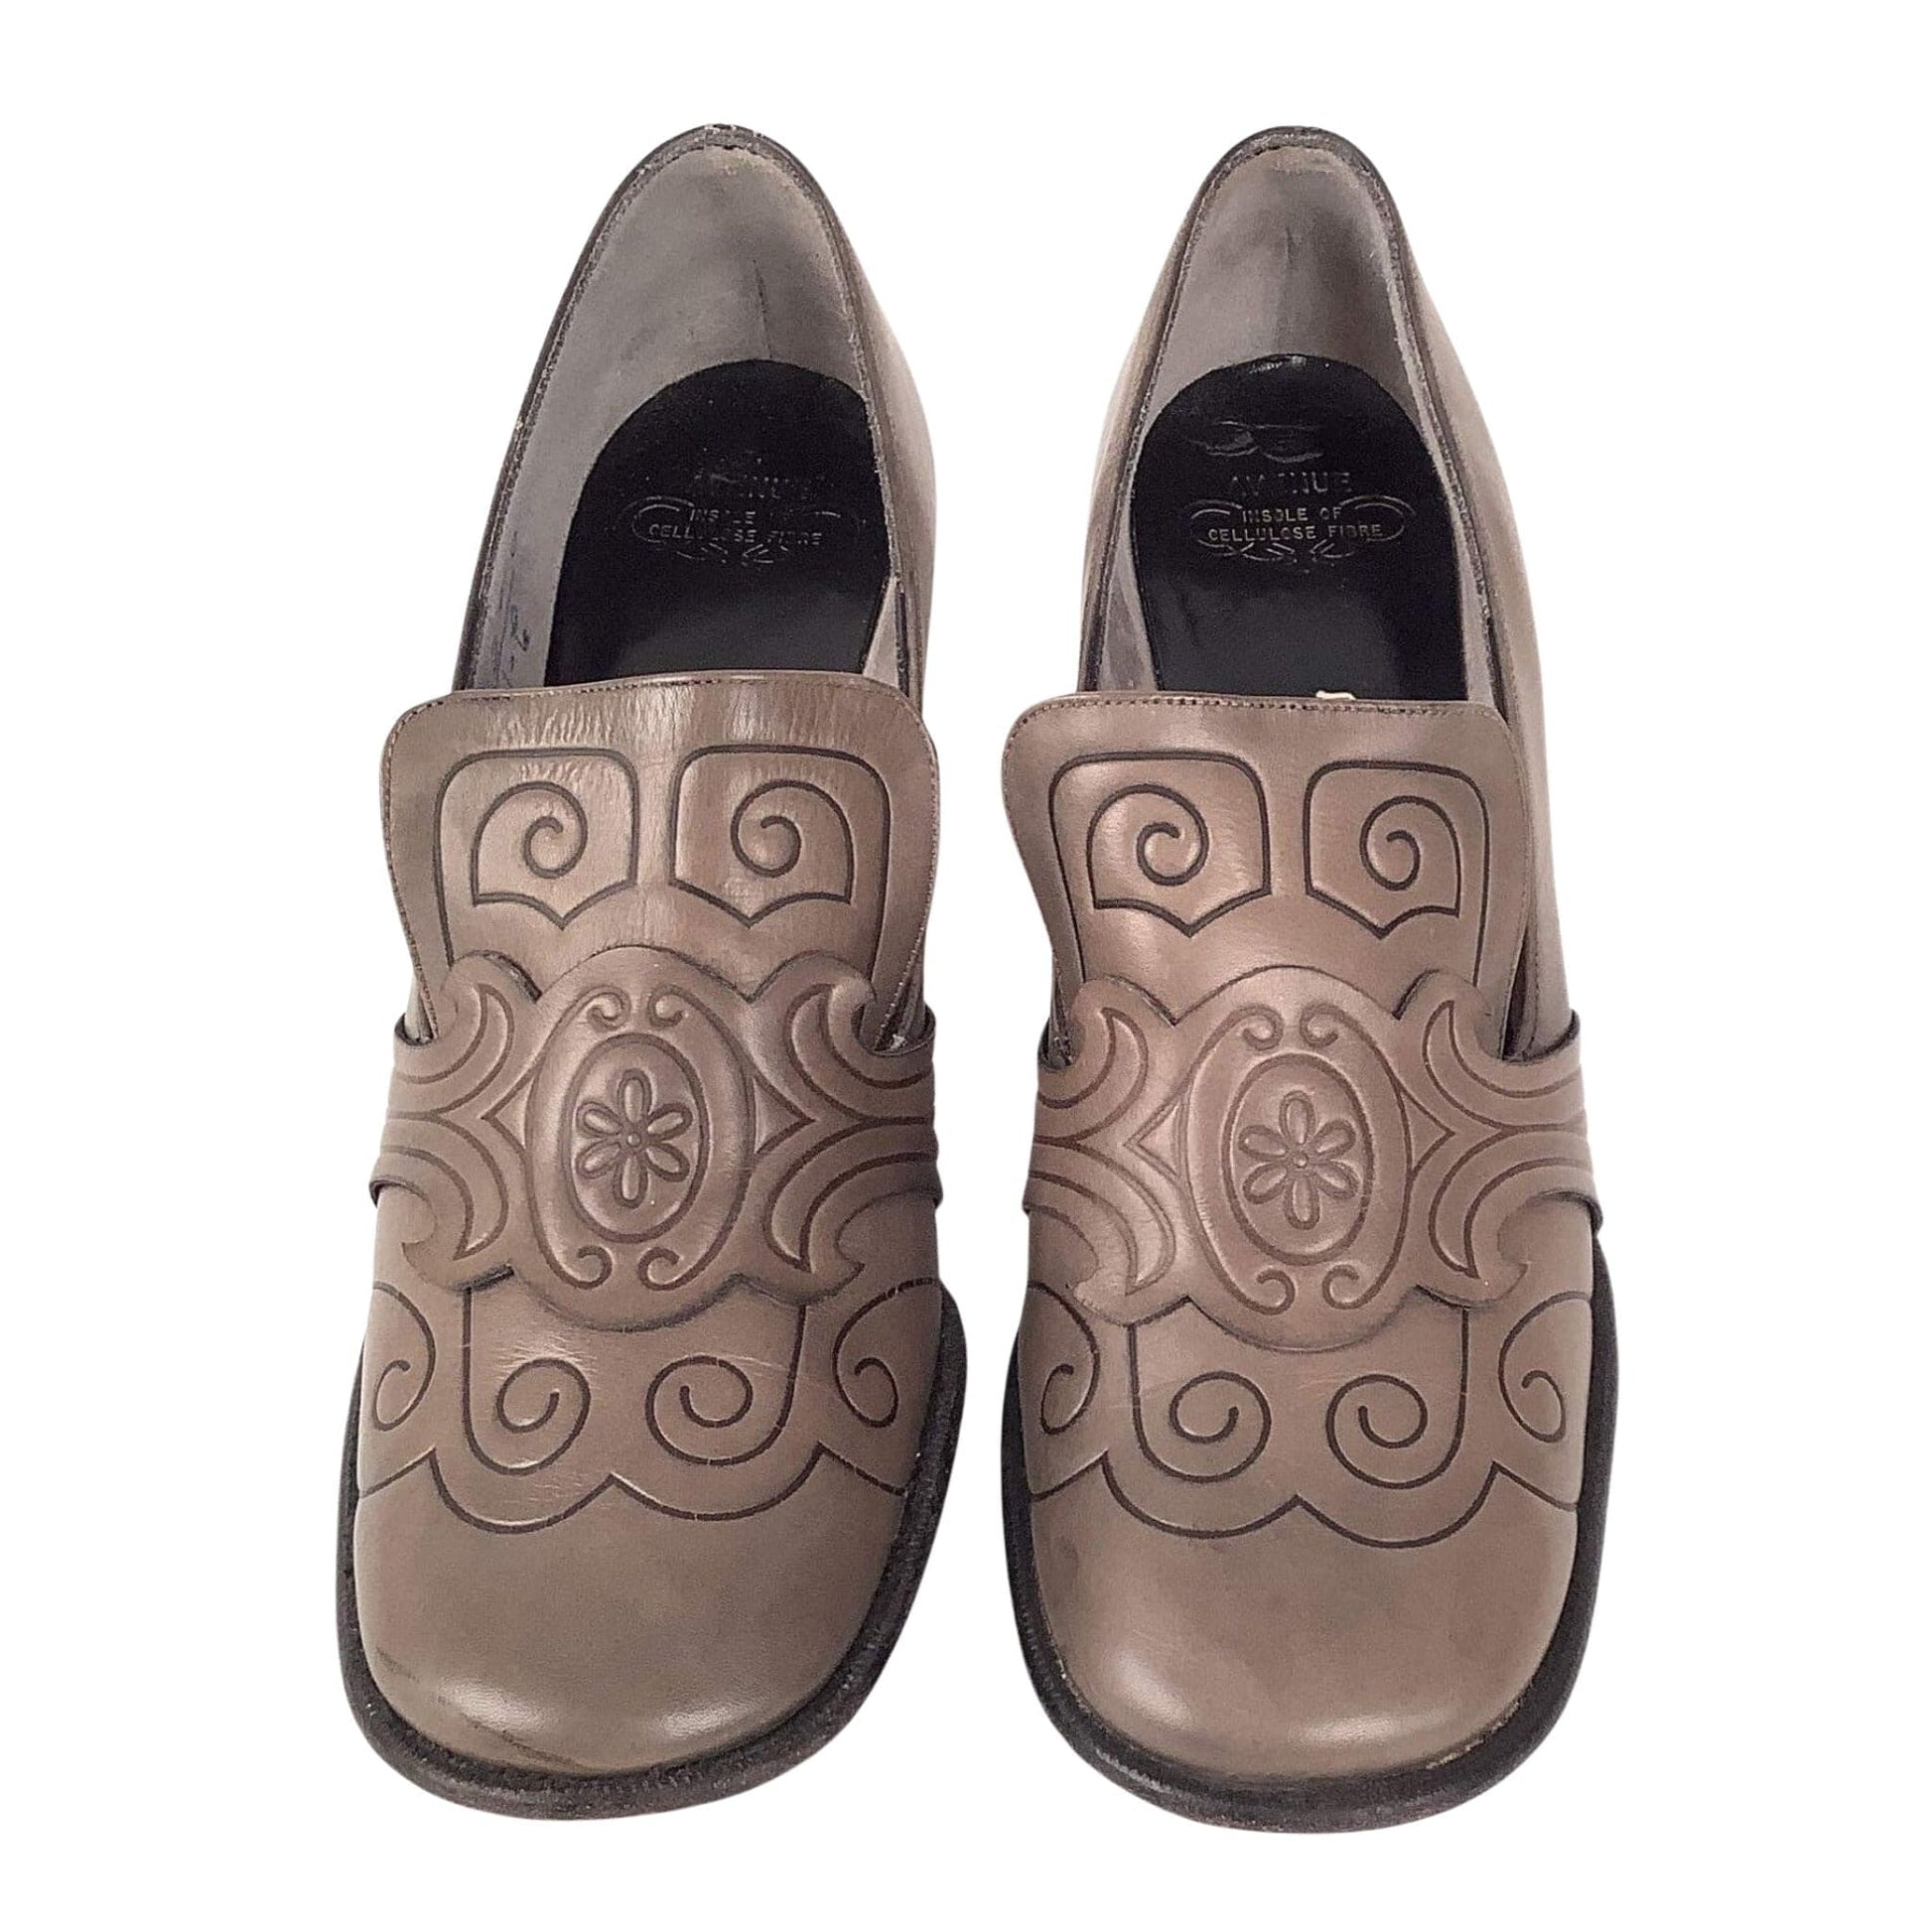 1960s Deliso Debs Loafers 7.5 / Taupe / Vintage 1960s